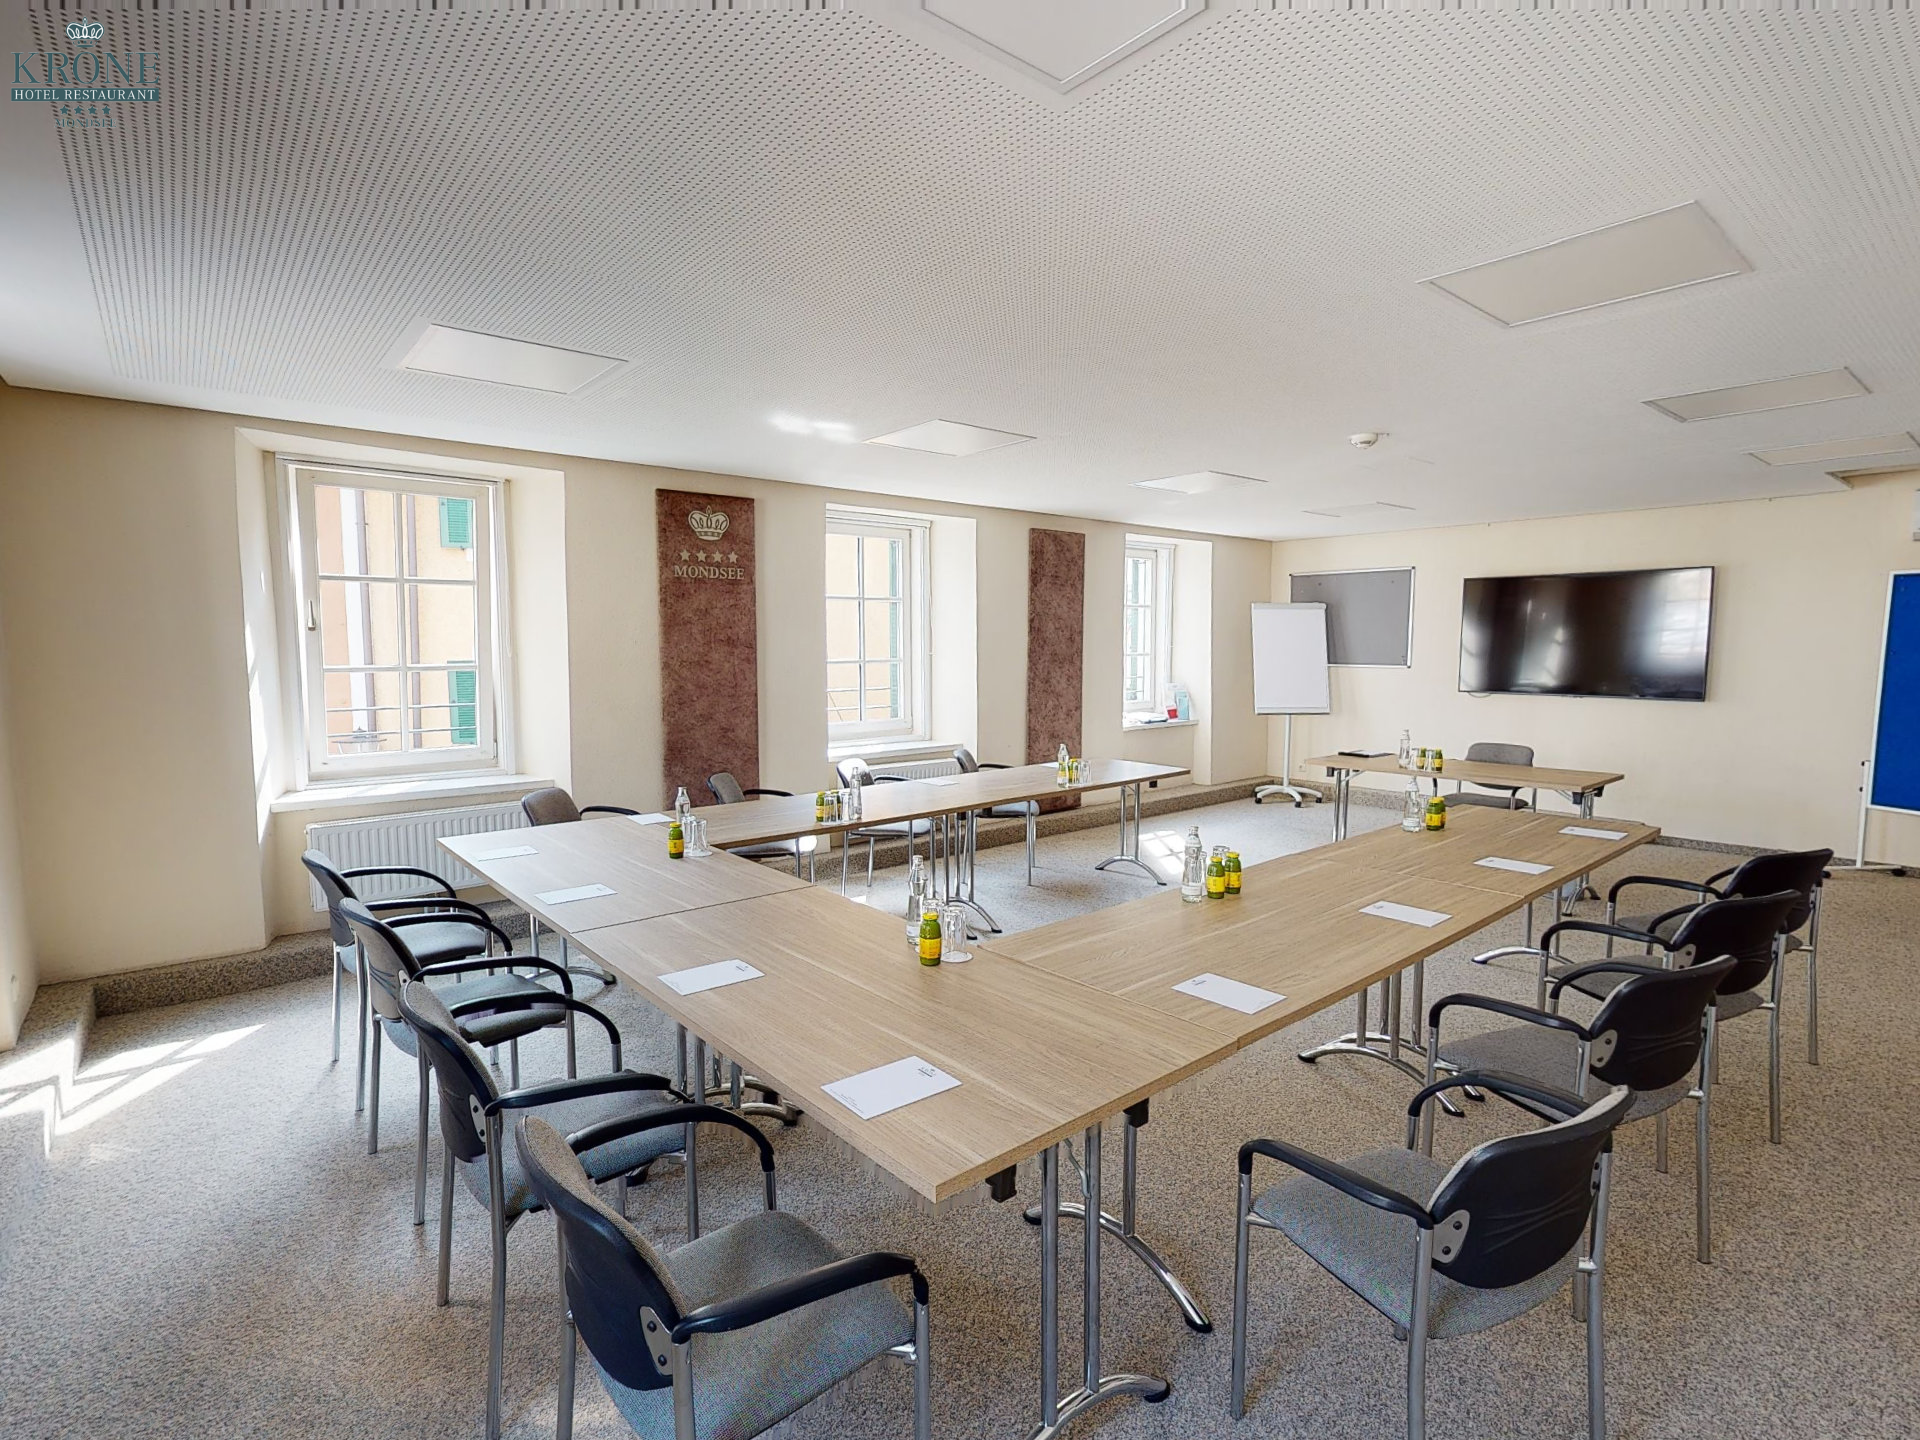 Brightly lit seminar room with screen and blackboards for meetings.